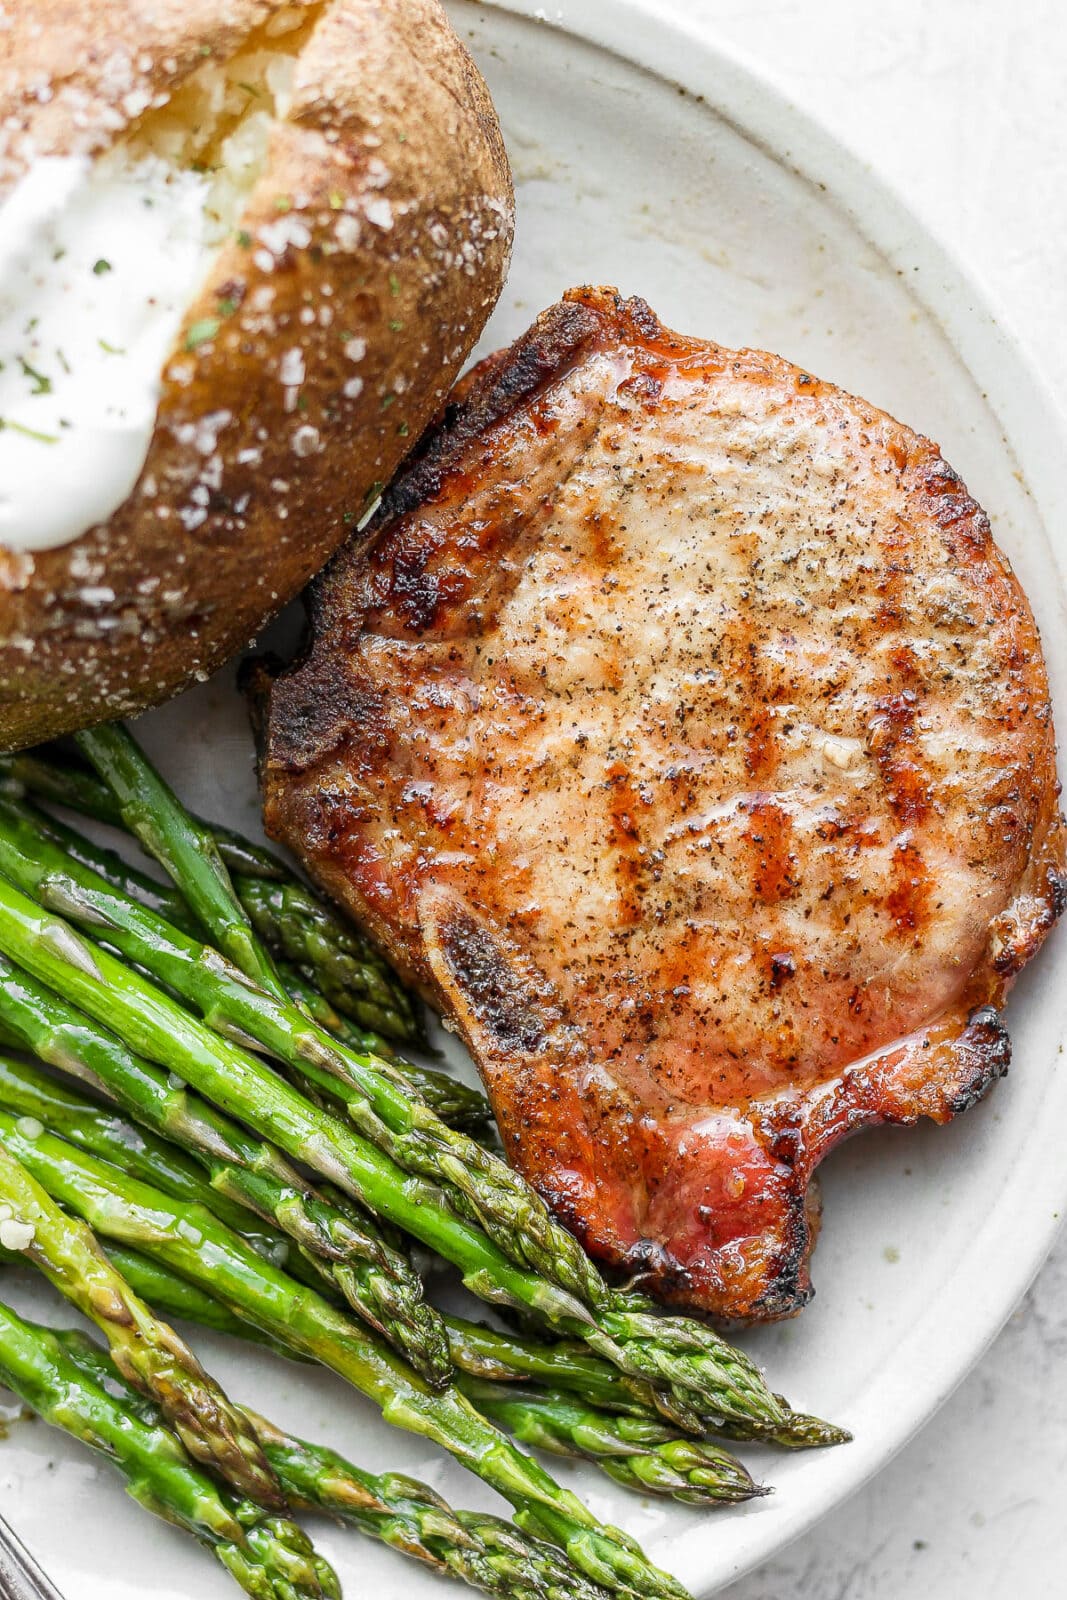 A plate with smoked asparagus, a pork chop, and a baked potato.